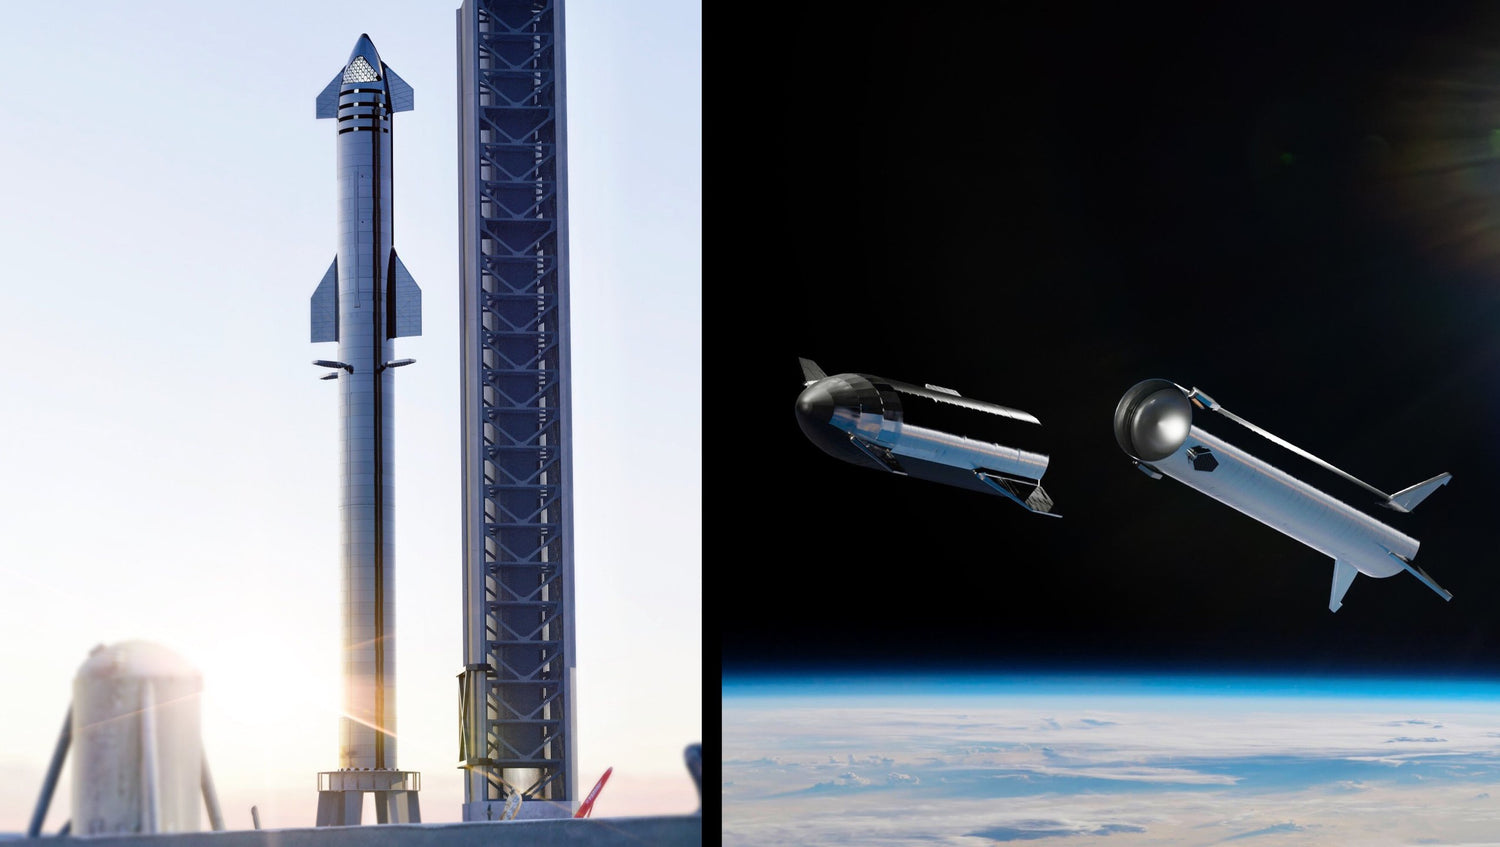 In a surprise move, the military's spaceplane will launch on Falcon Heavy